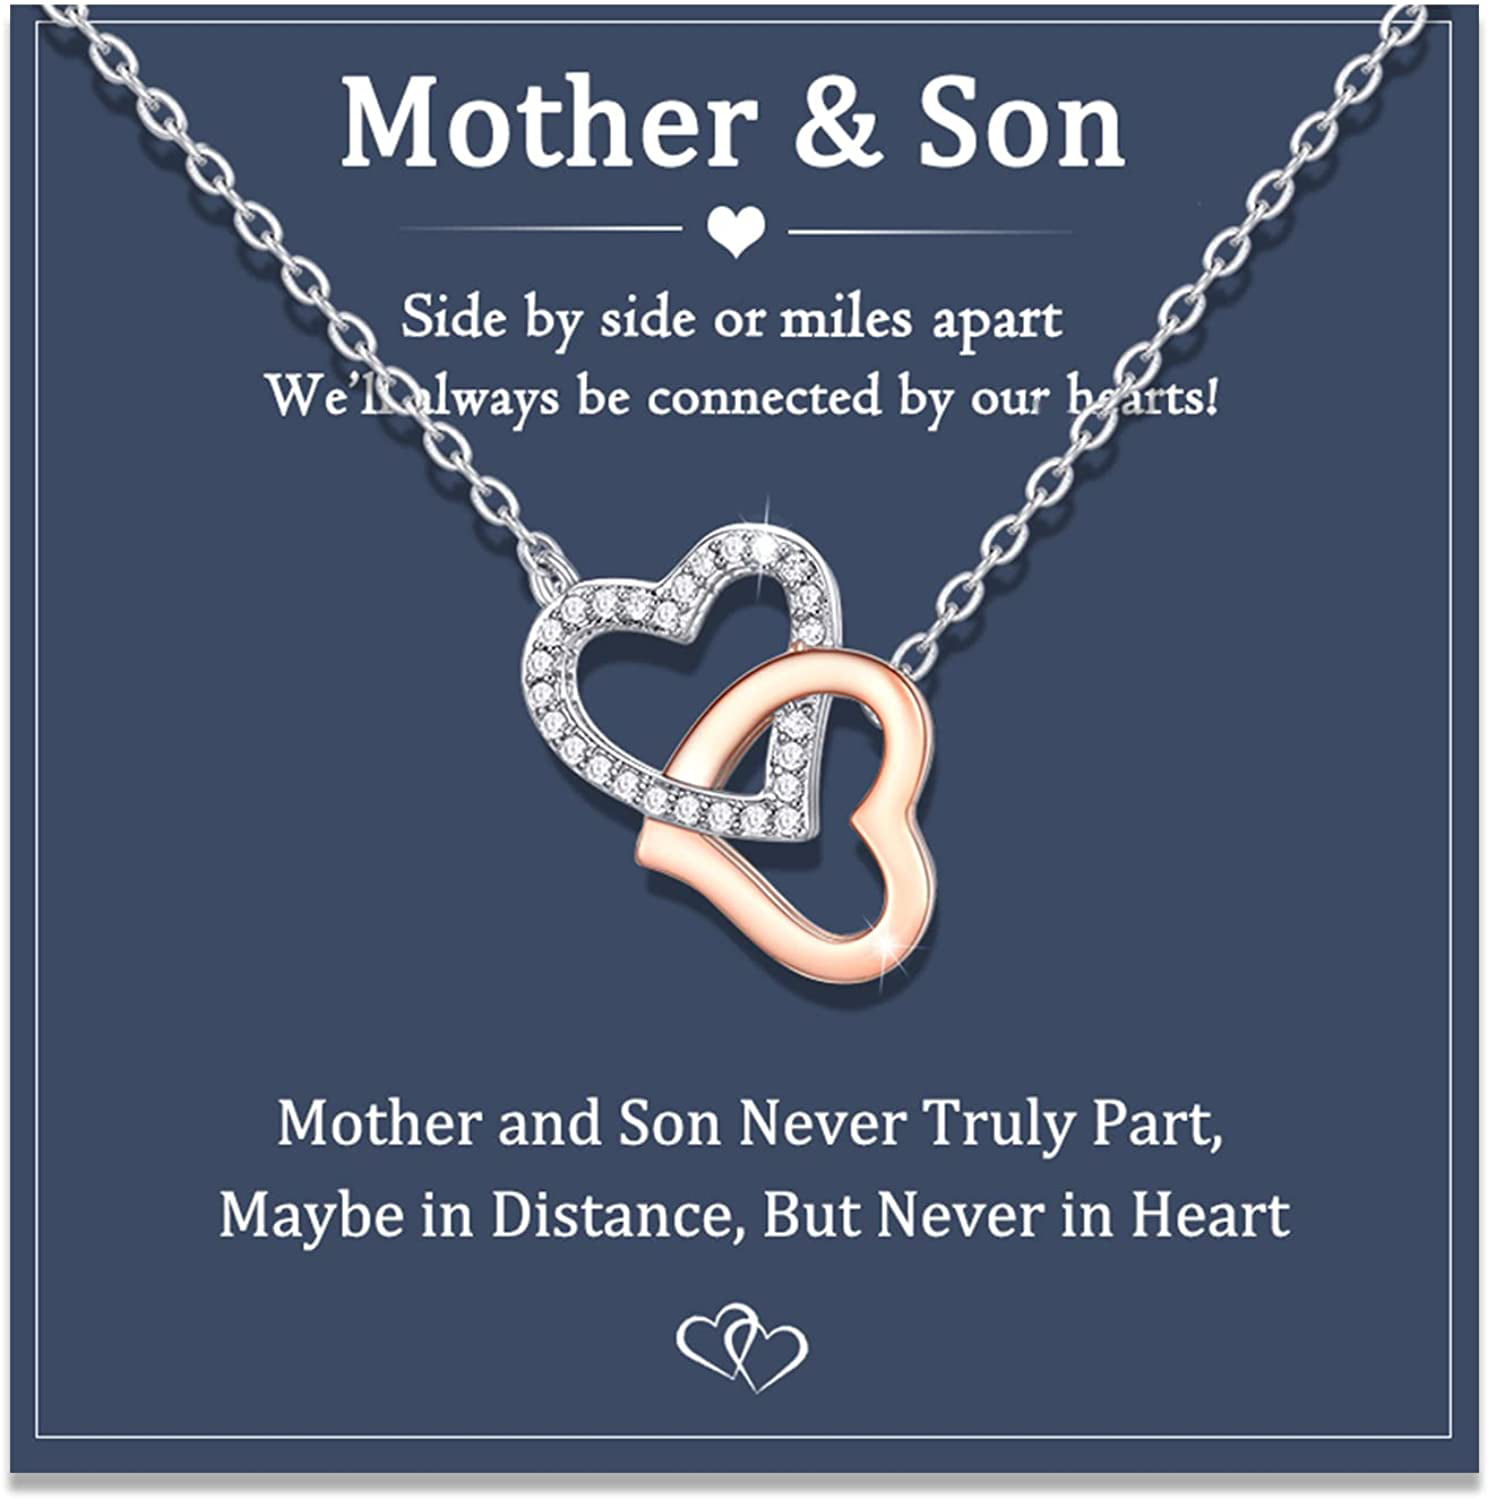 Mother Son Necklace for Mom from Son Mom Interlocking Heart Necklace e637d889 33b5 44a7 b49e 68df2bdc7449.dd2d032ed0835ce3397c60f616751bb9